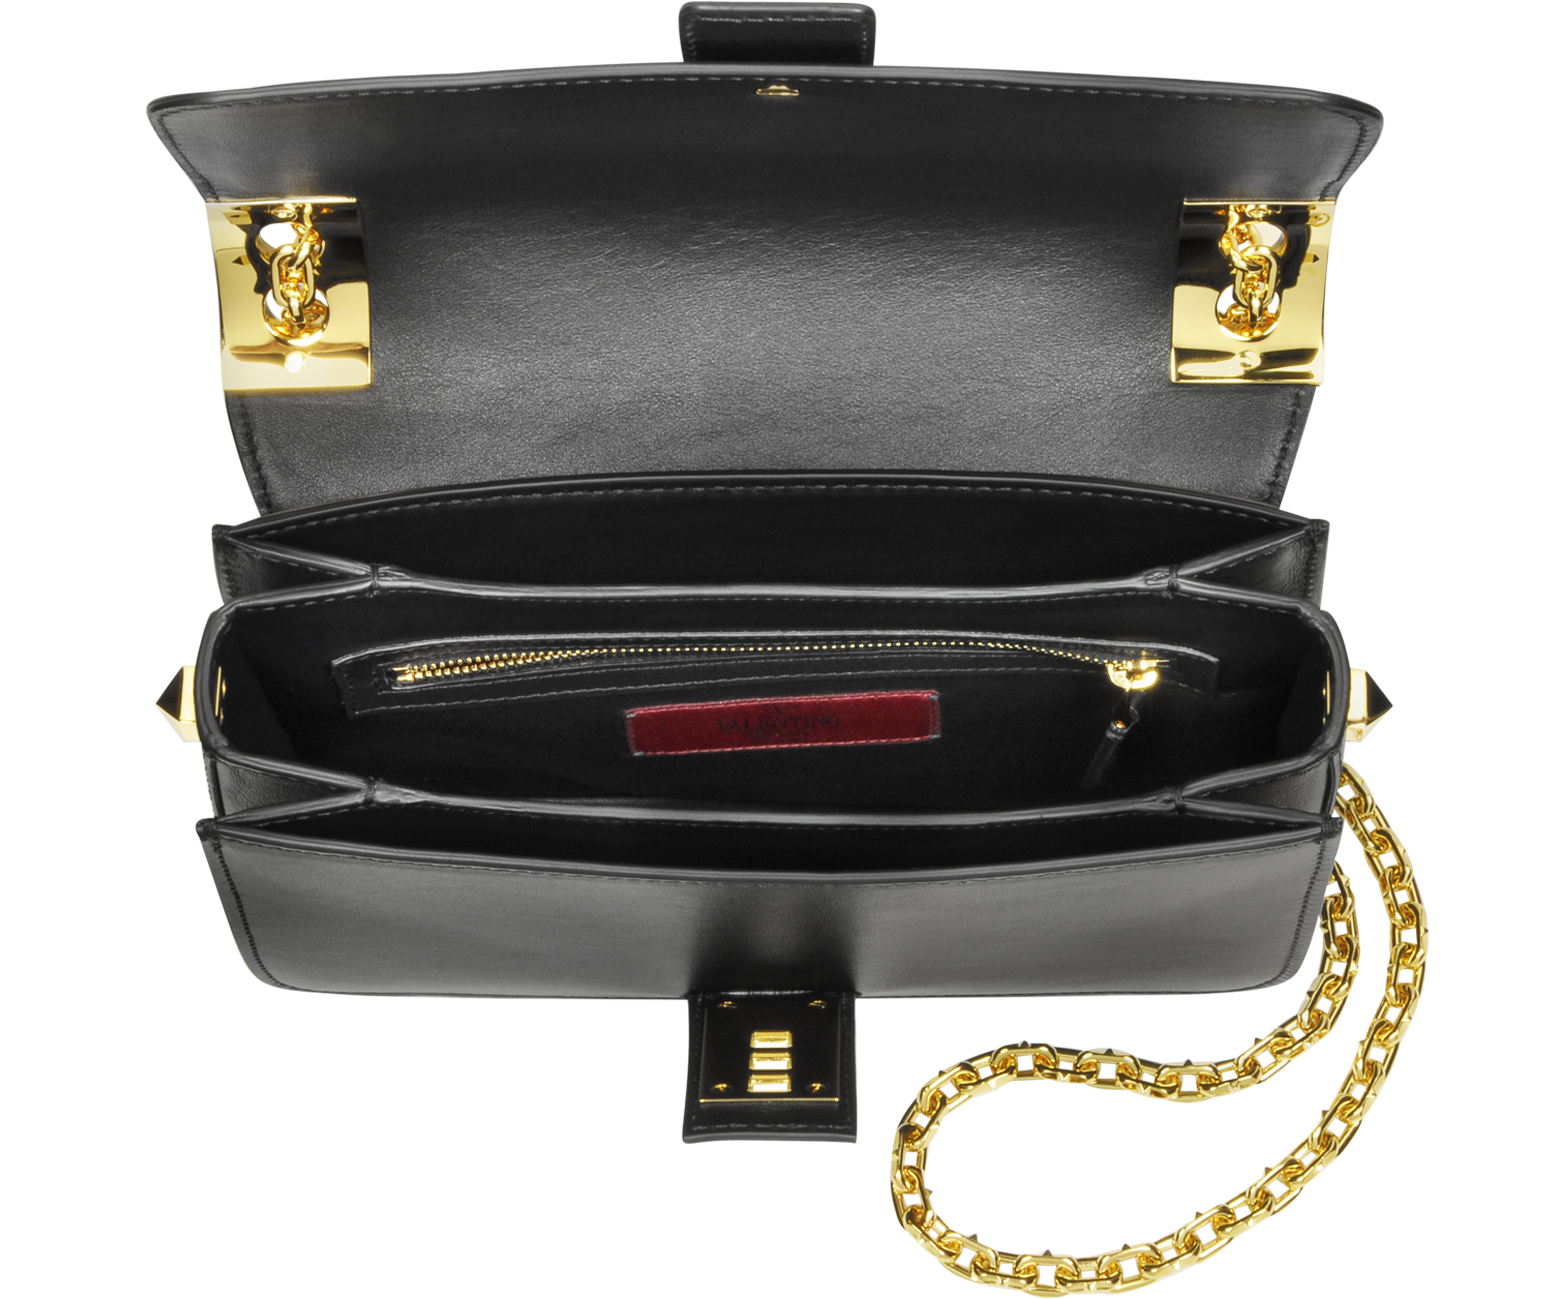 Valentino My Rockstud Black Leather Chain Shoulder Bag at FORZIERI